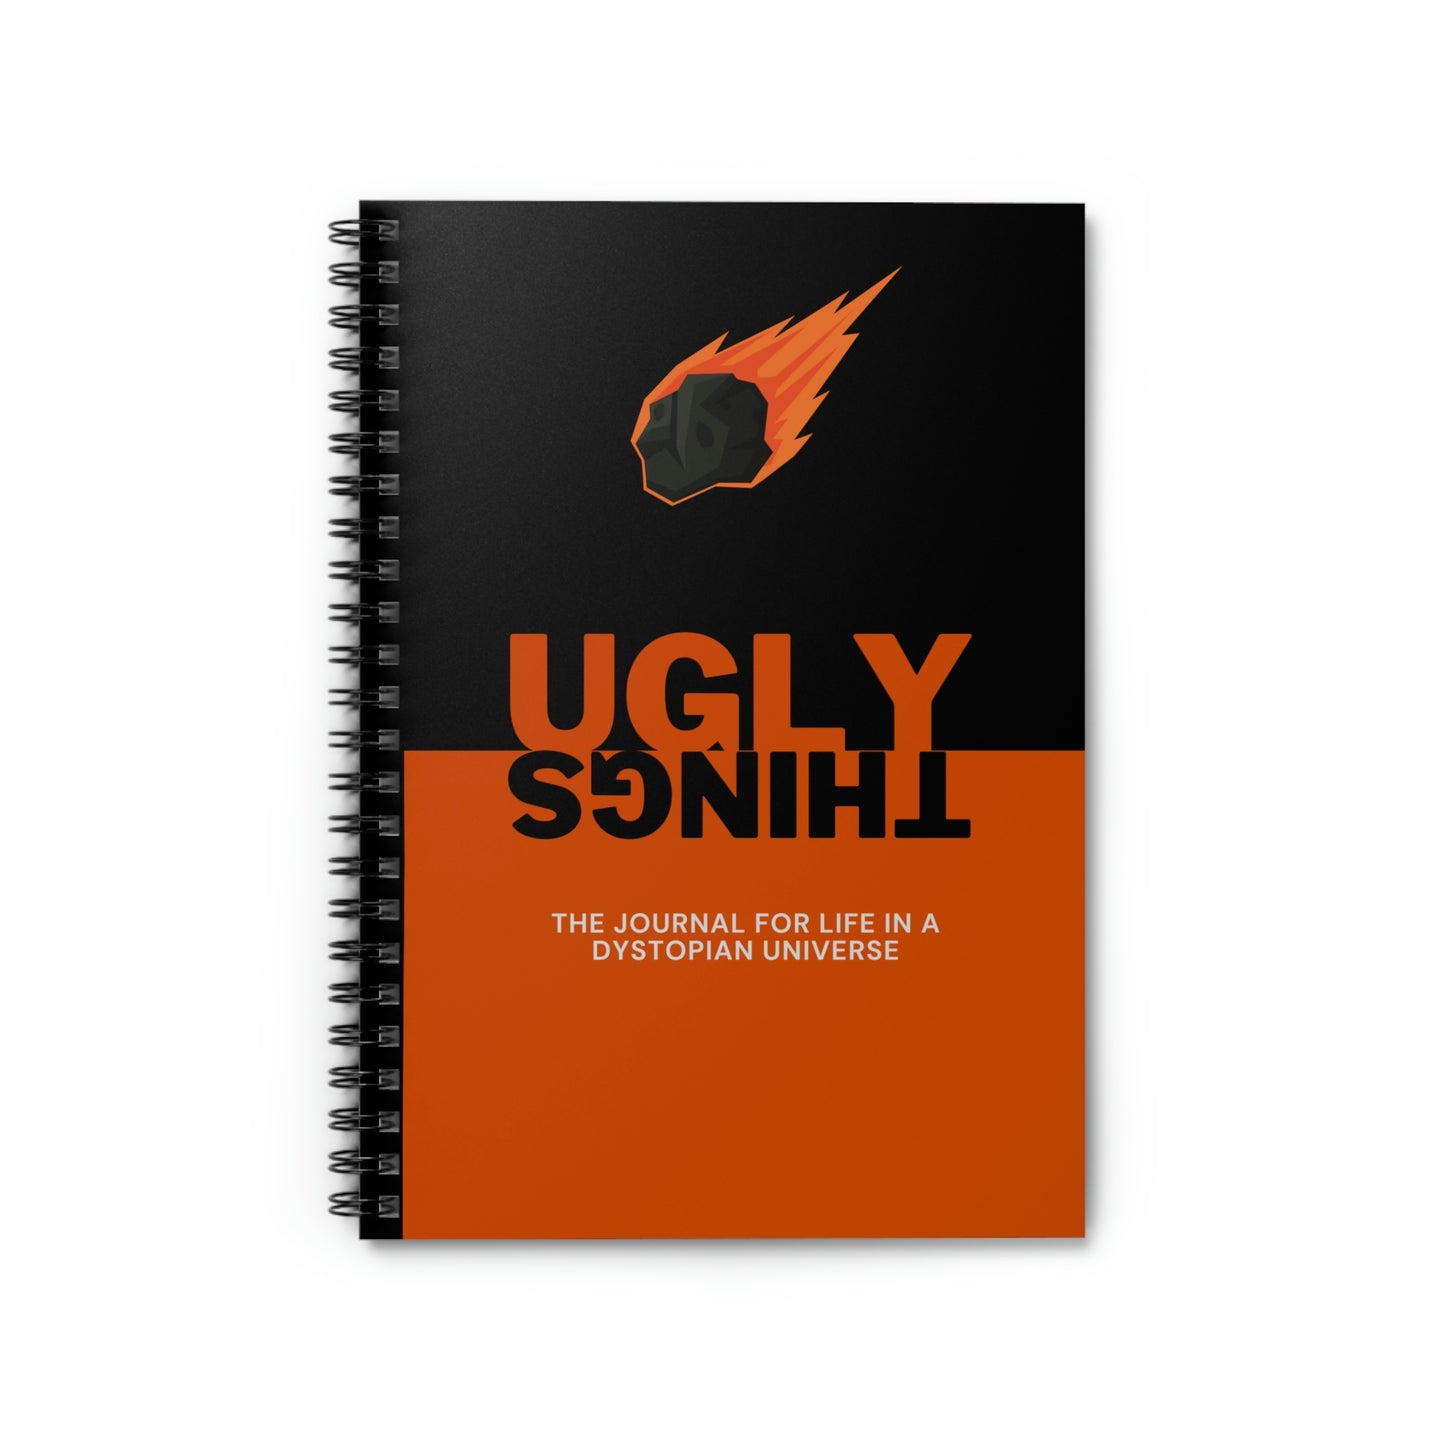 Ugly Things Apocalypse Spiral Notebook - Ruled Line